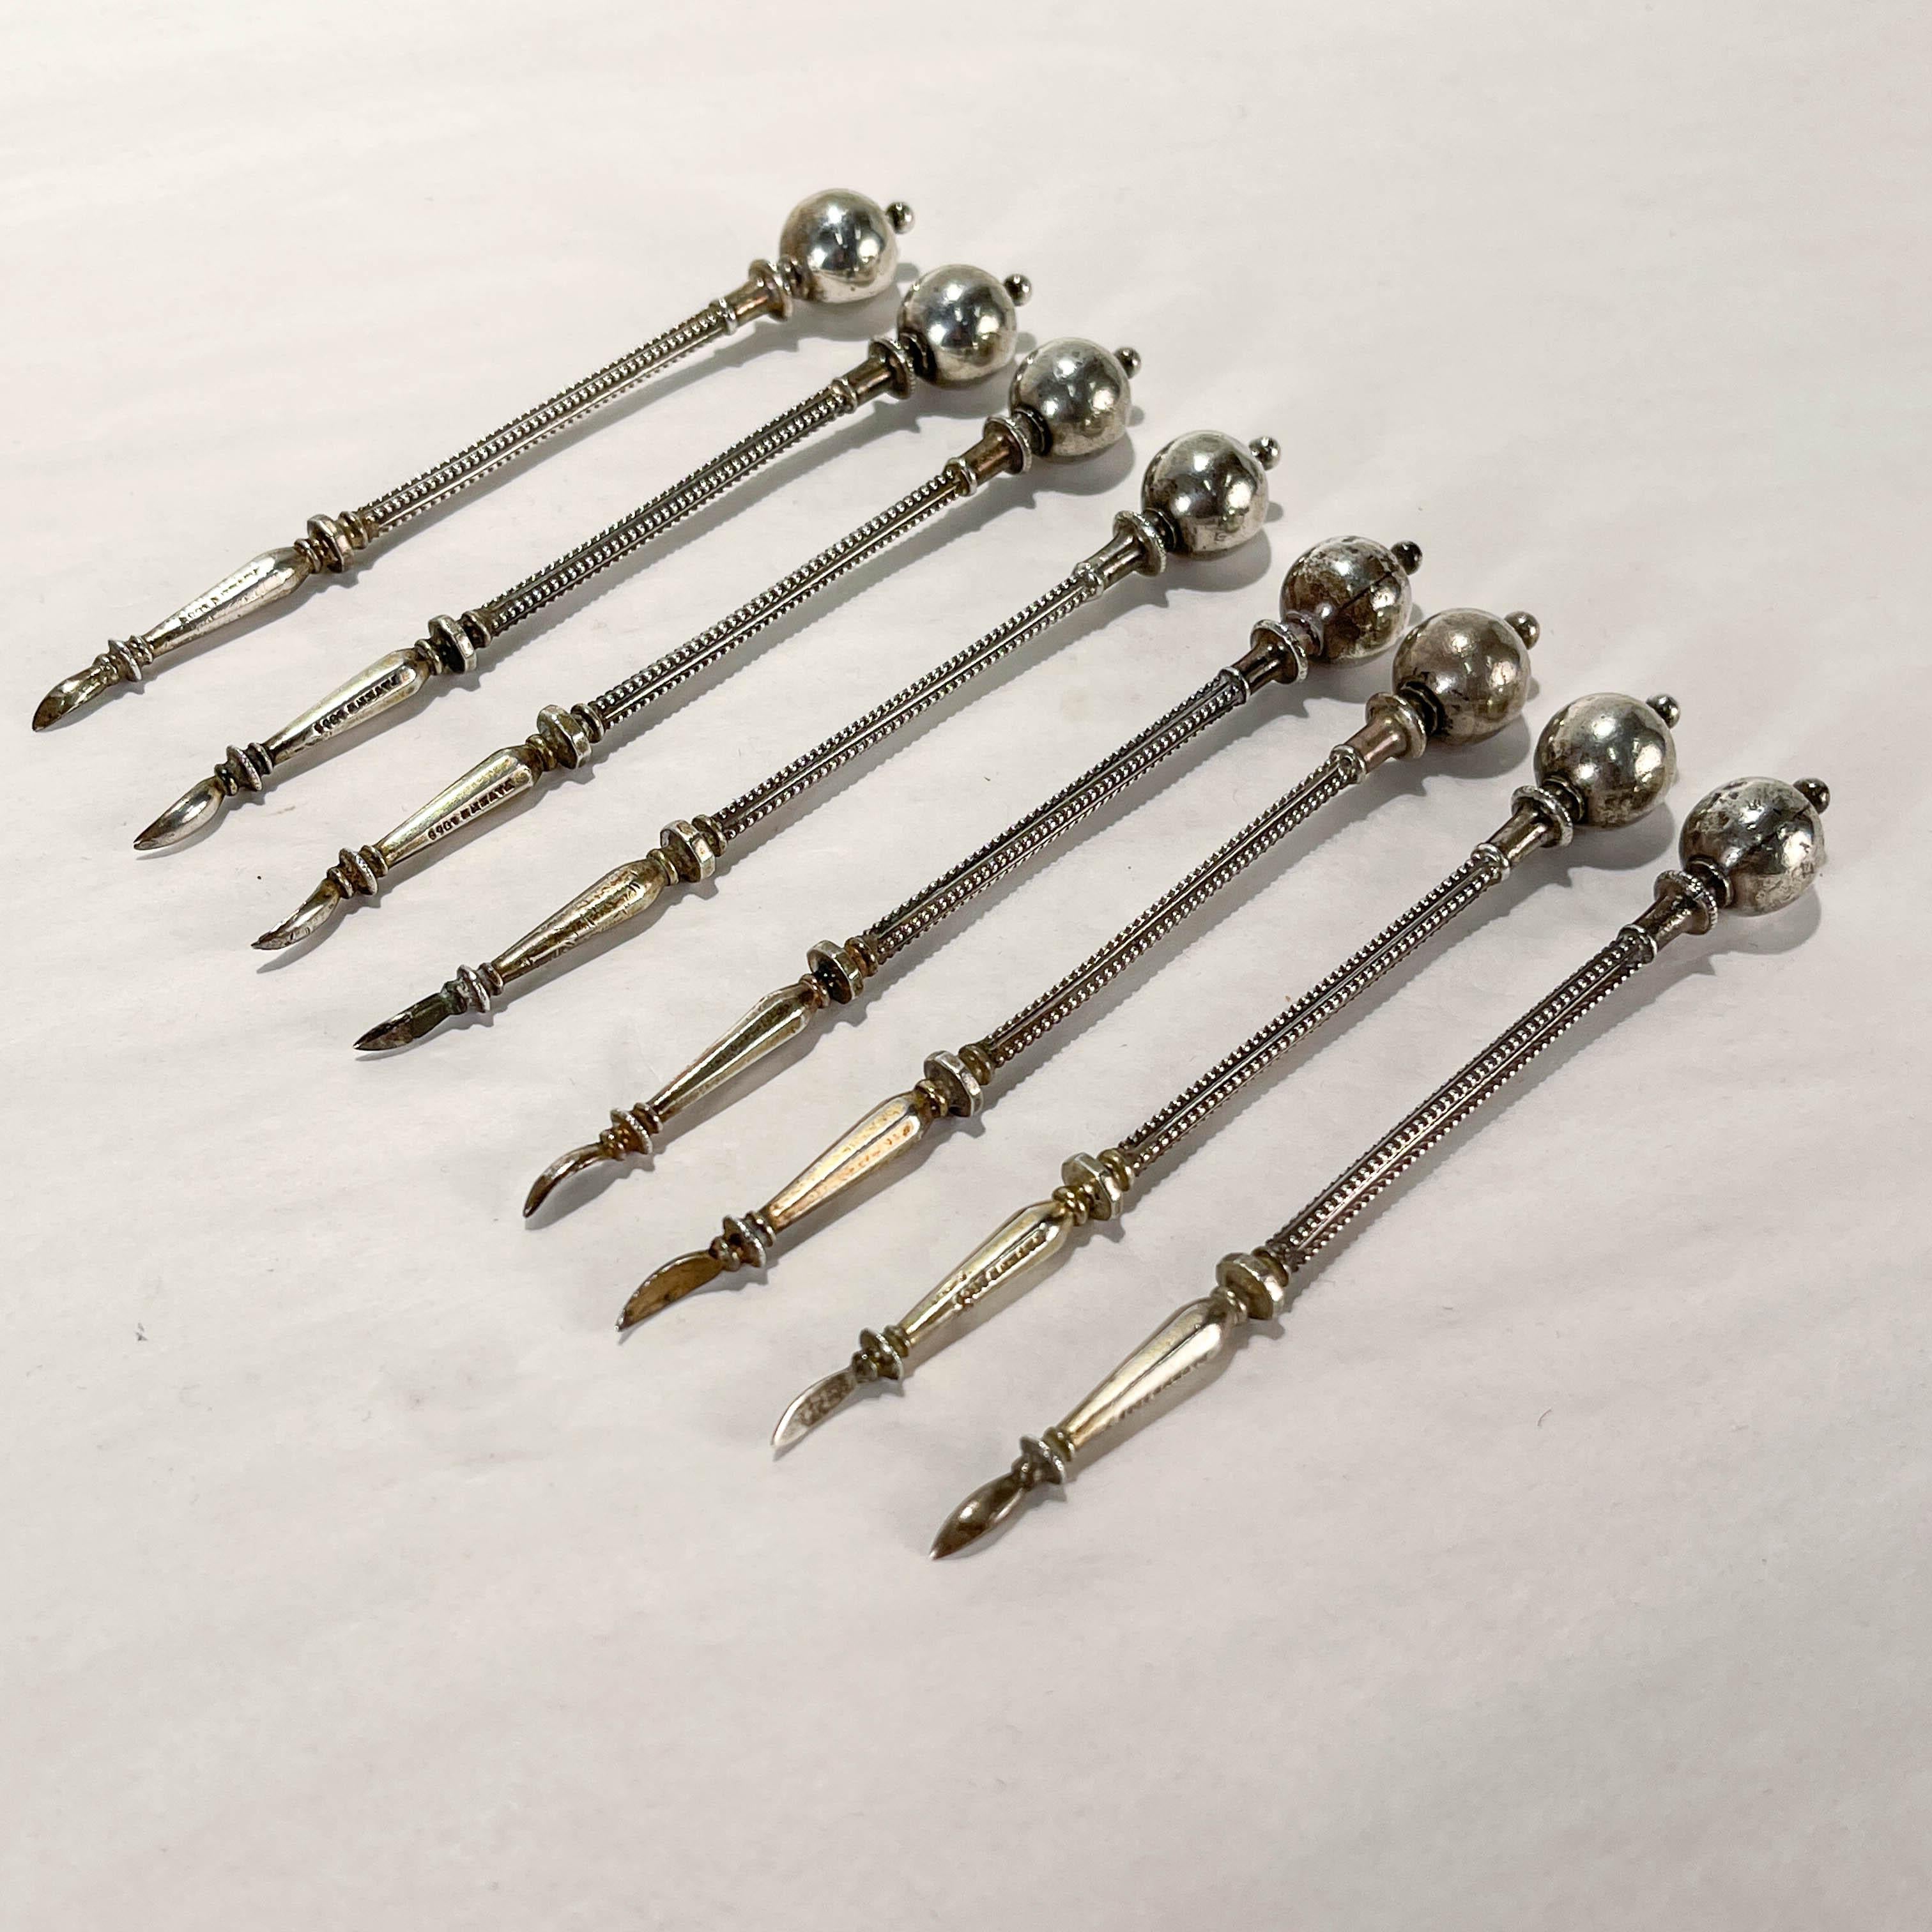 A fine set of 8 antique silver nut picks.

By George Sharp in the Ball End pattern.

In coin silver. 

Simply a great set of nut picks!

Date:
Mid-19th Century

Overall Condition:
It is in overall good, as-pictured, used estate condition.

Condition